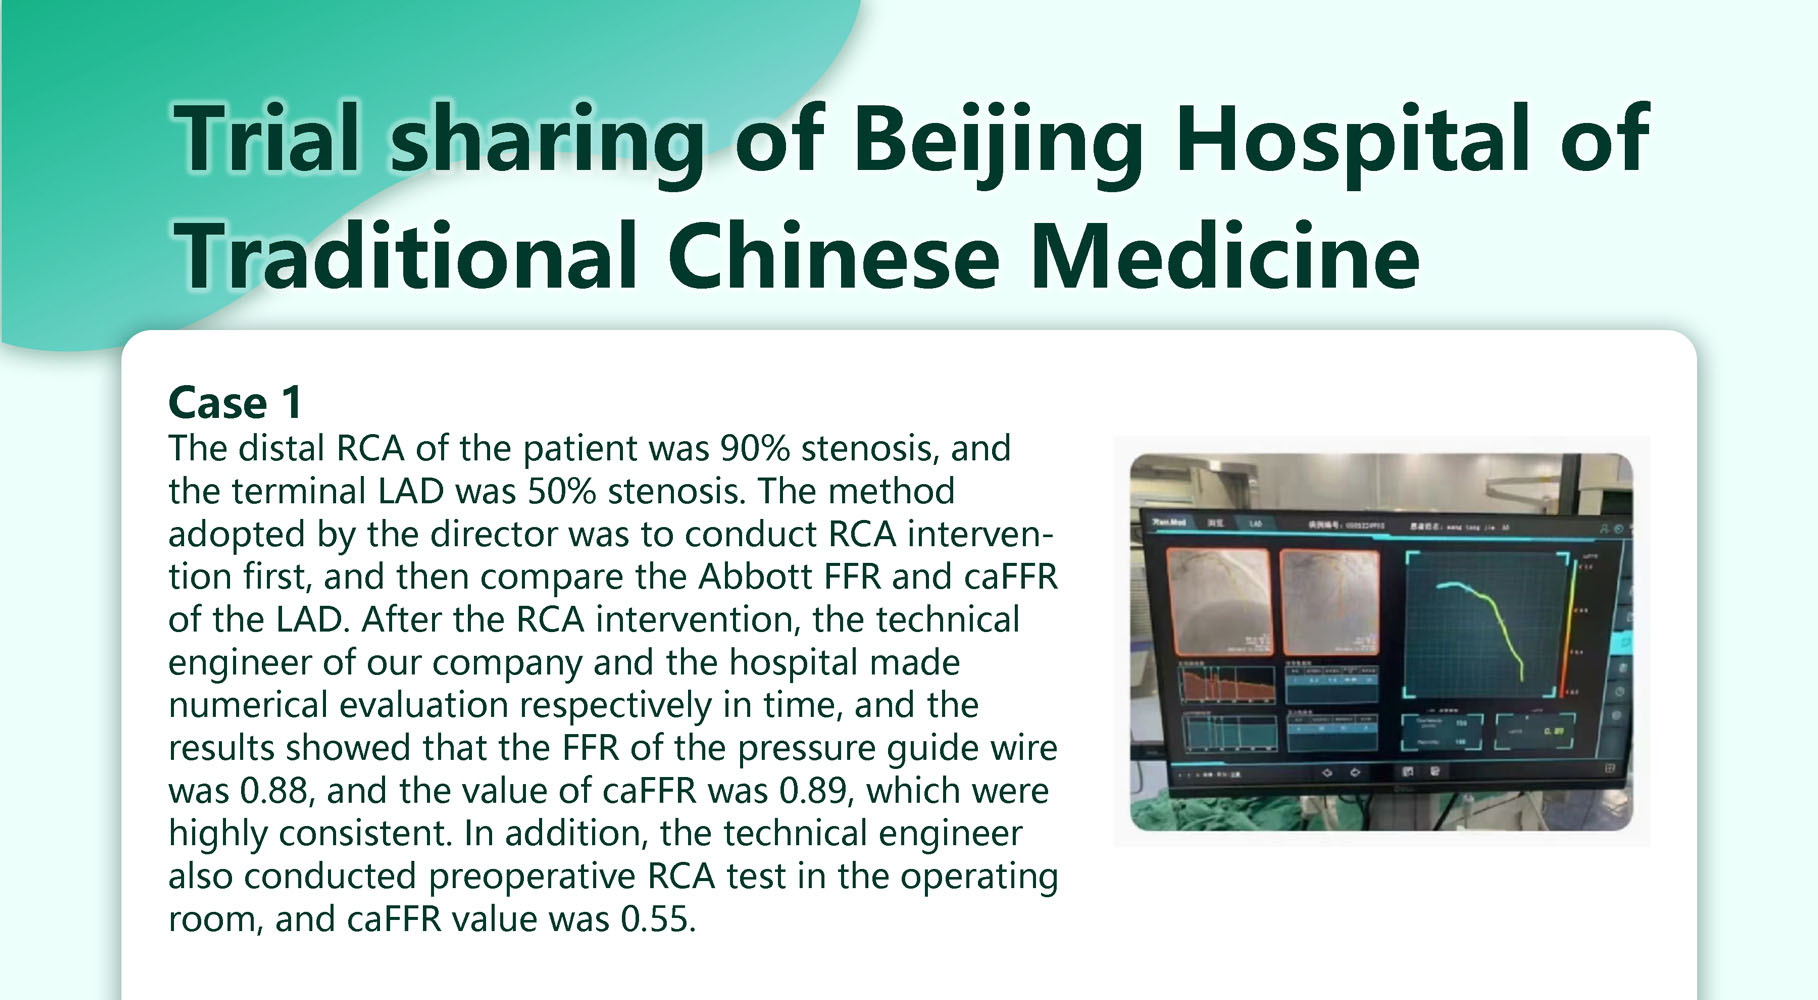 Trial sharing of Beijing Hospital of Traditional Chinese Medicine